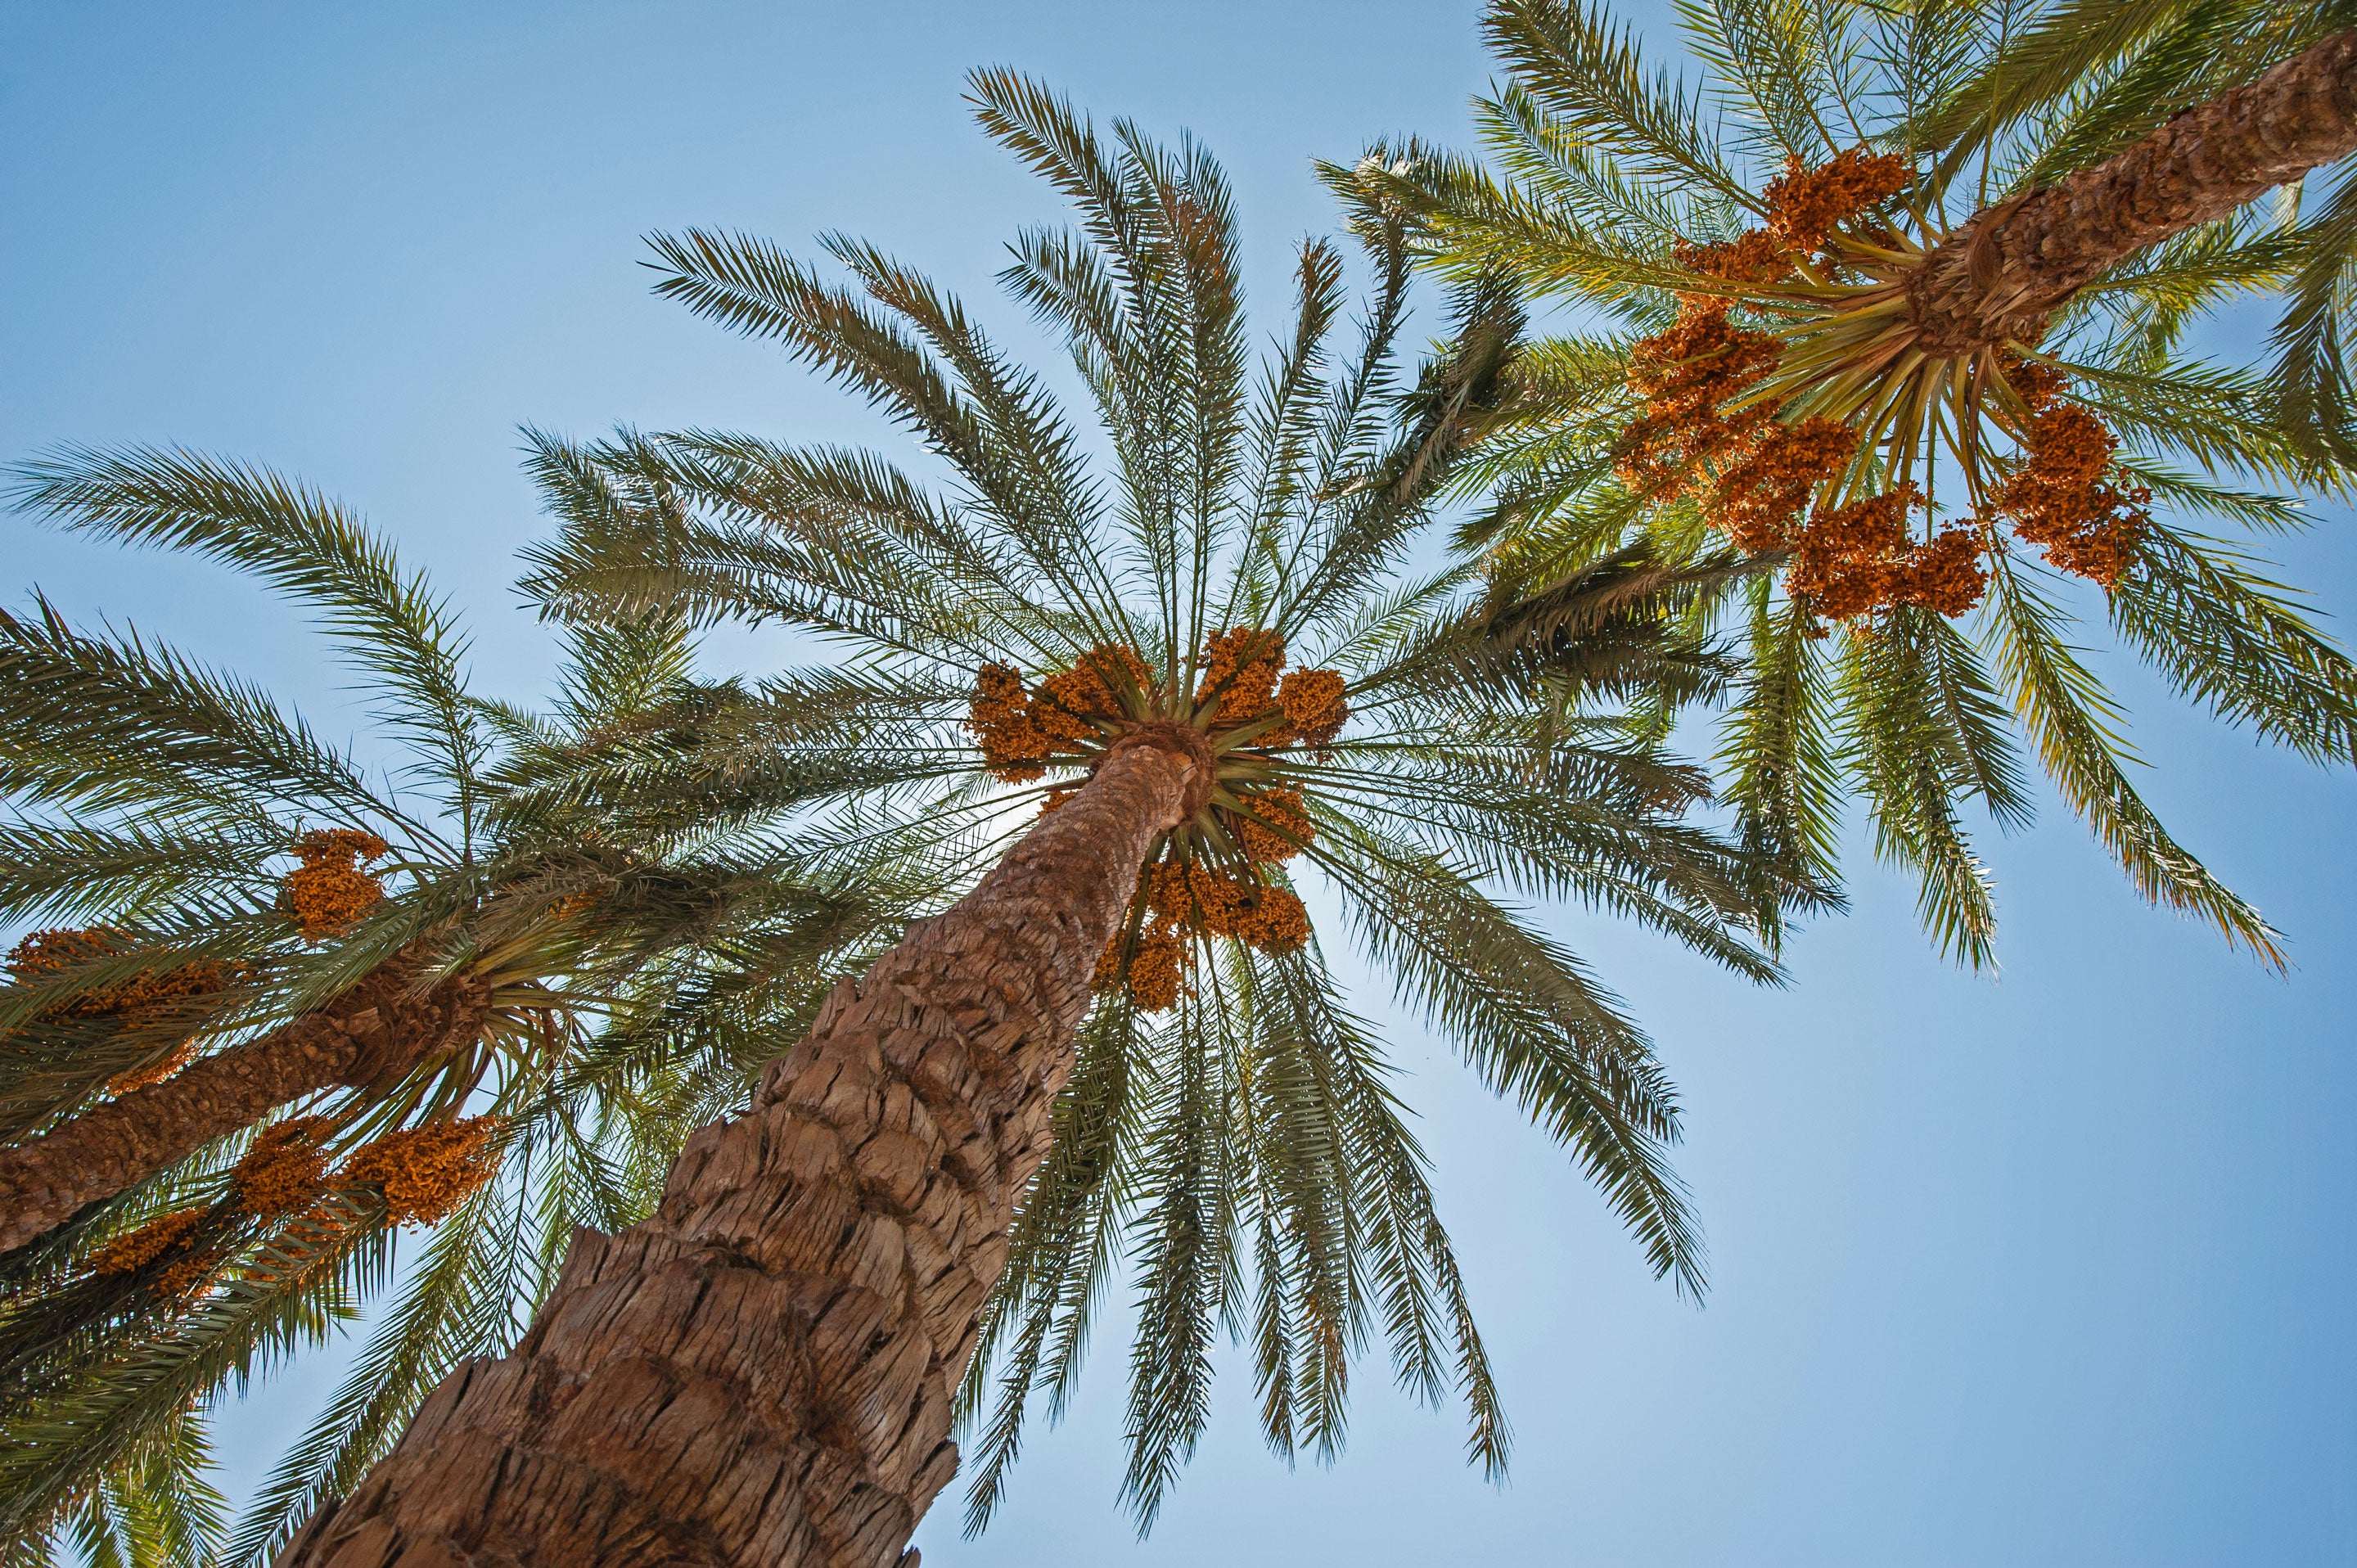 Date Palms against the sky on Date Farm.